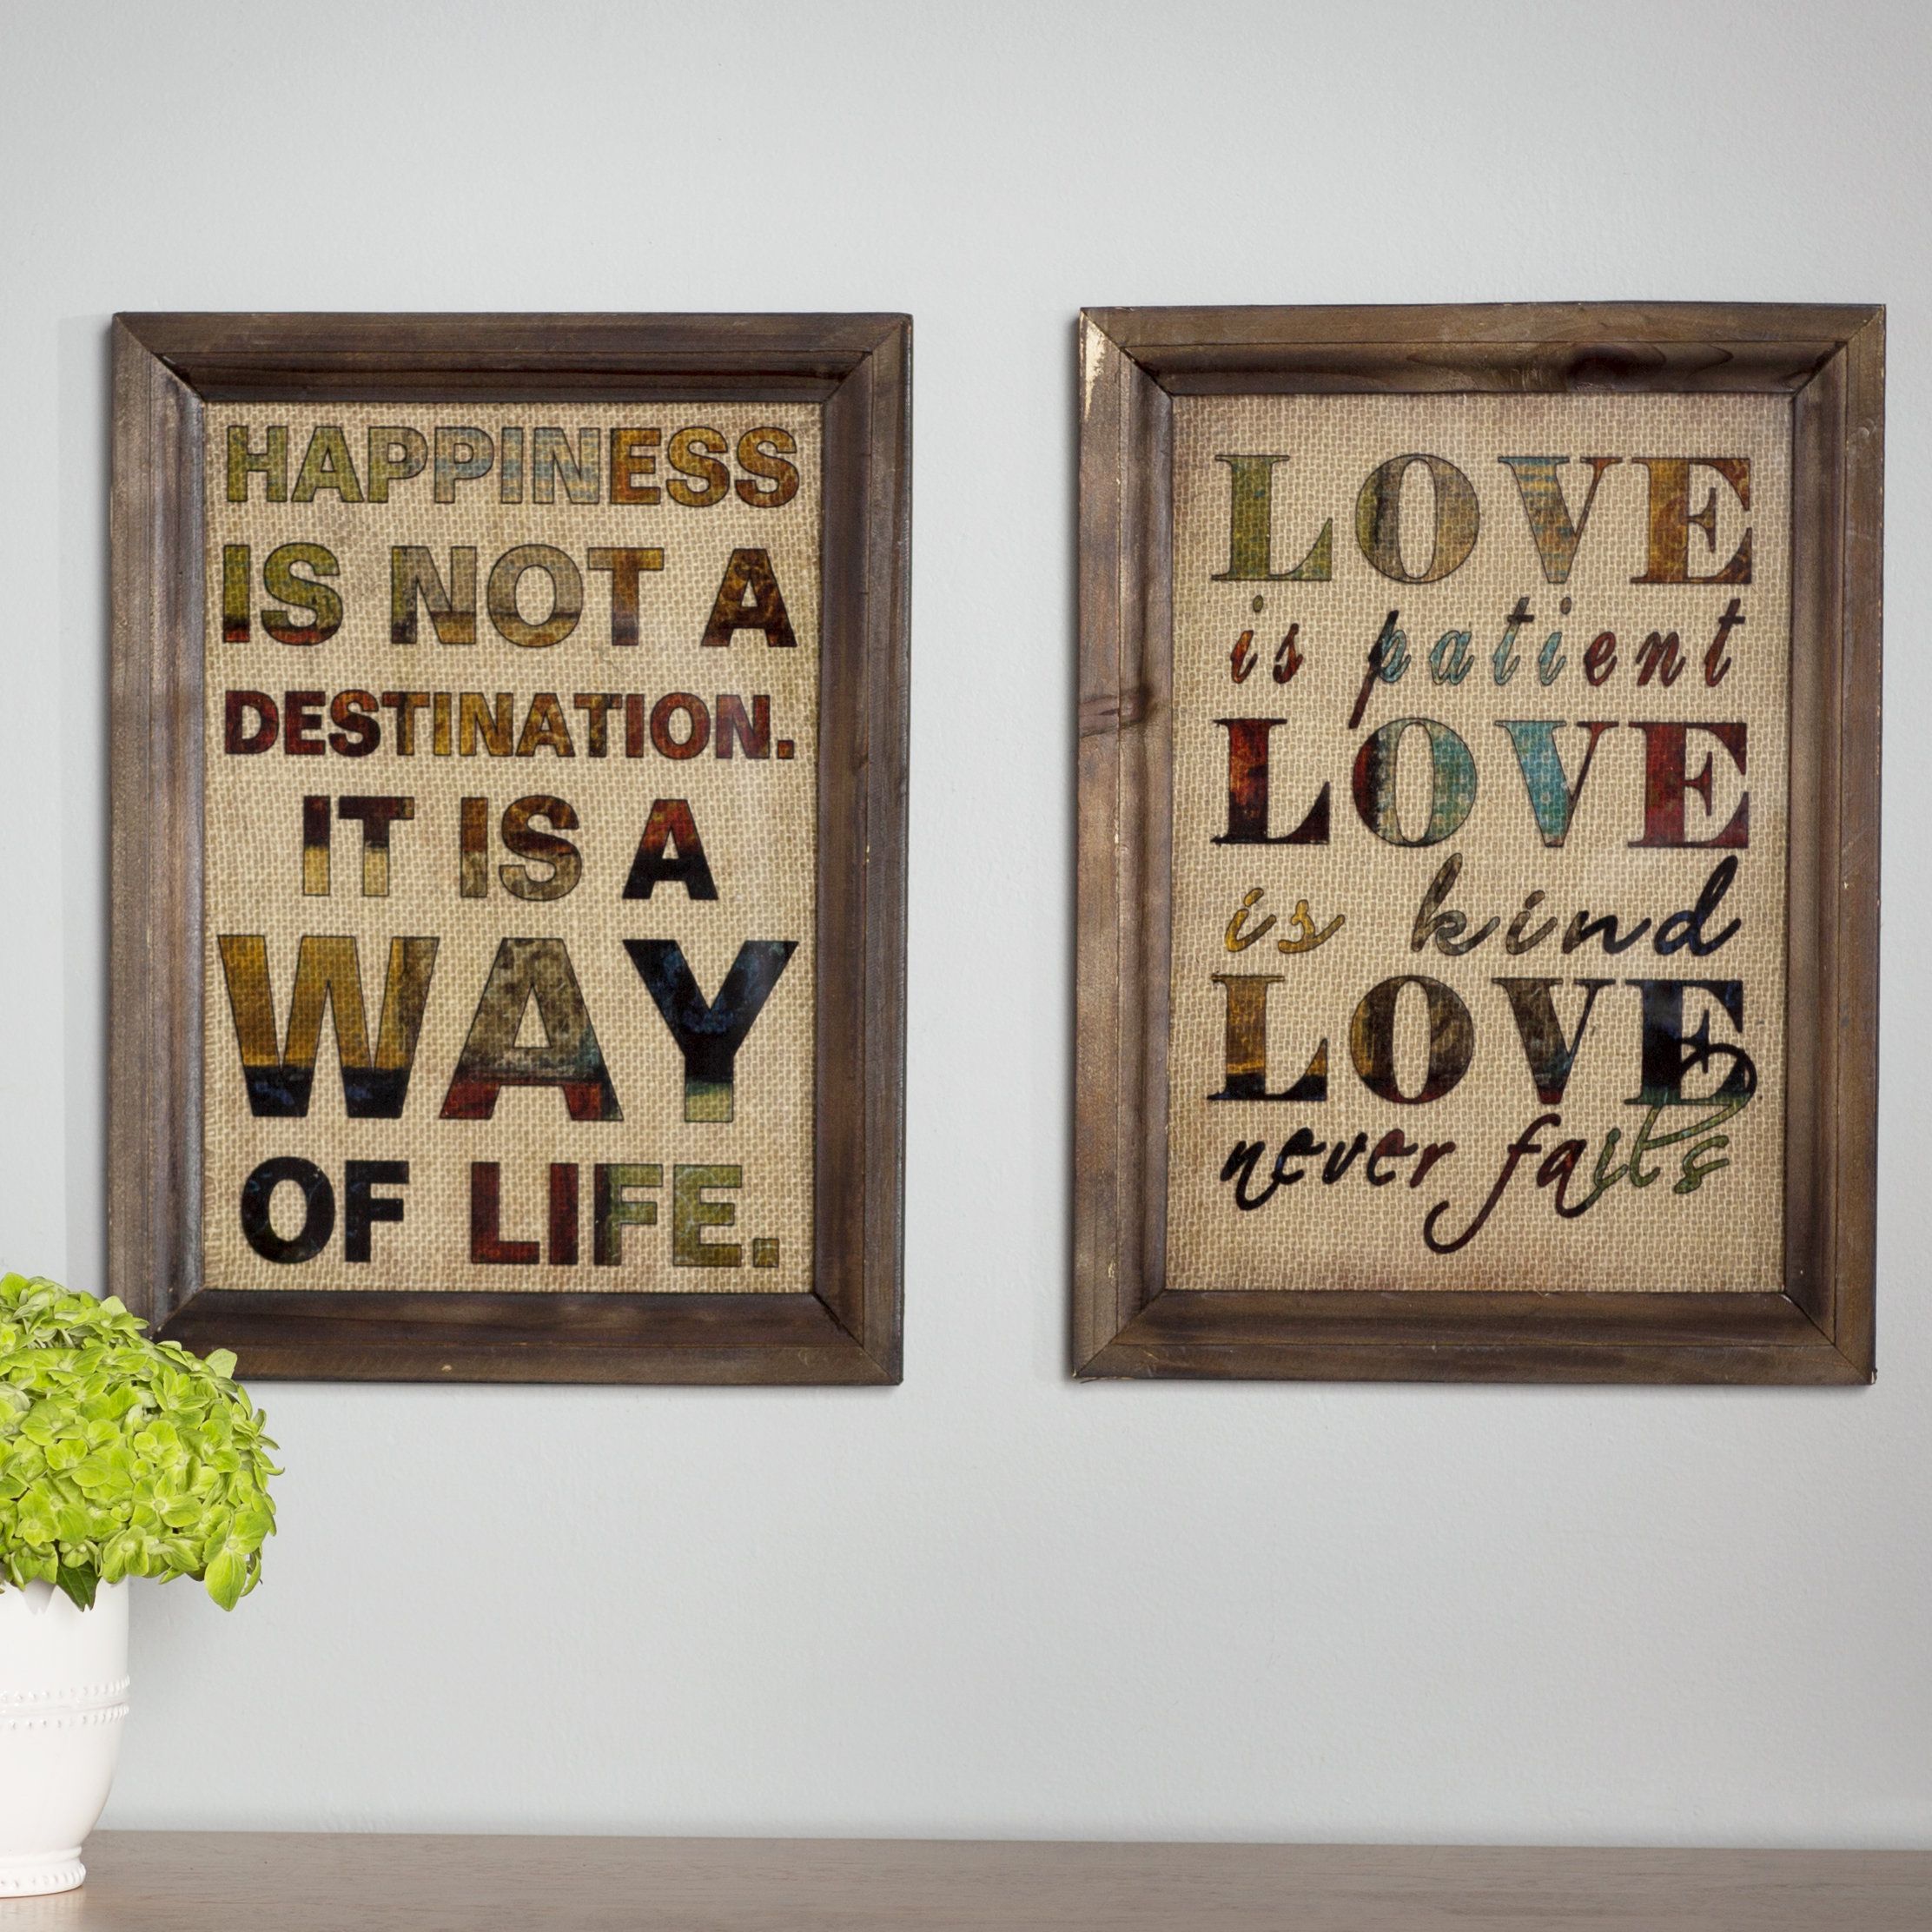 Saybrook Quoted Wall Décor Set With Wonderful World Wall Decor By Latitude Run (View 23 of 30)